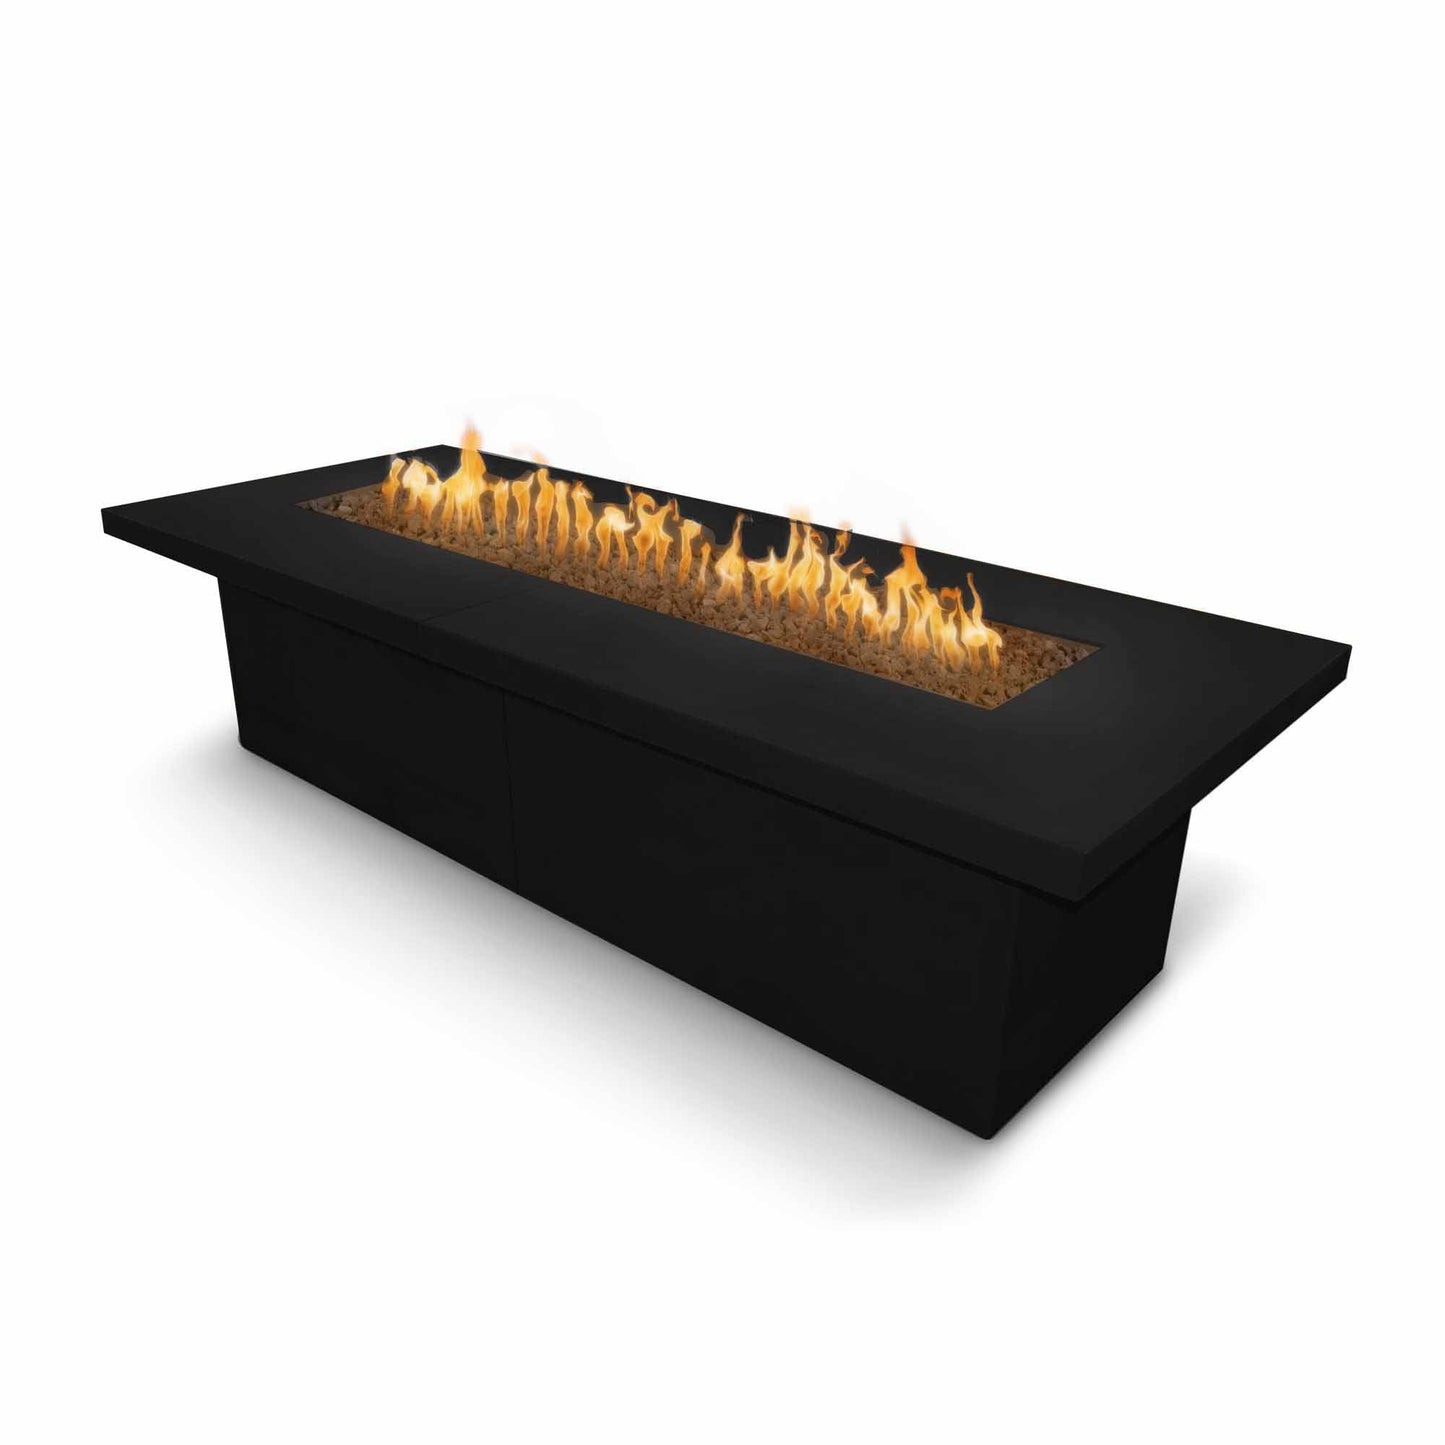 The Outdoor Plus Rectangular Newport 120" Black Powder Coated Metal Liquid Propane Fire Pit with Match Lit Ignition